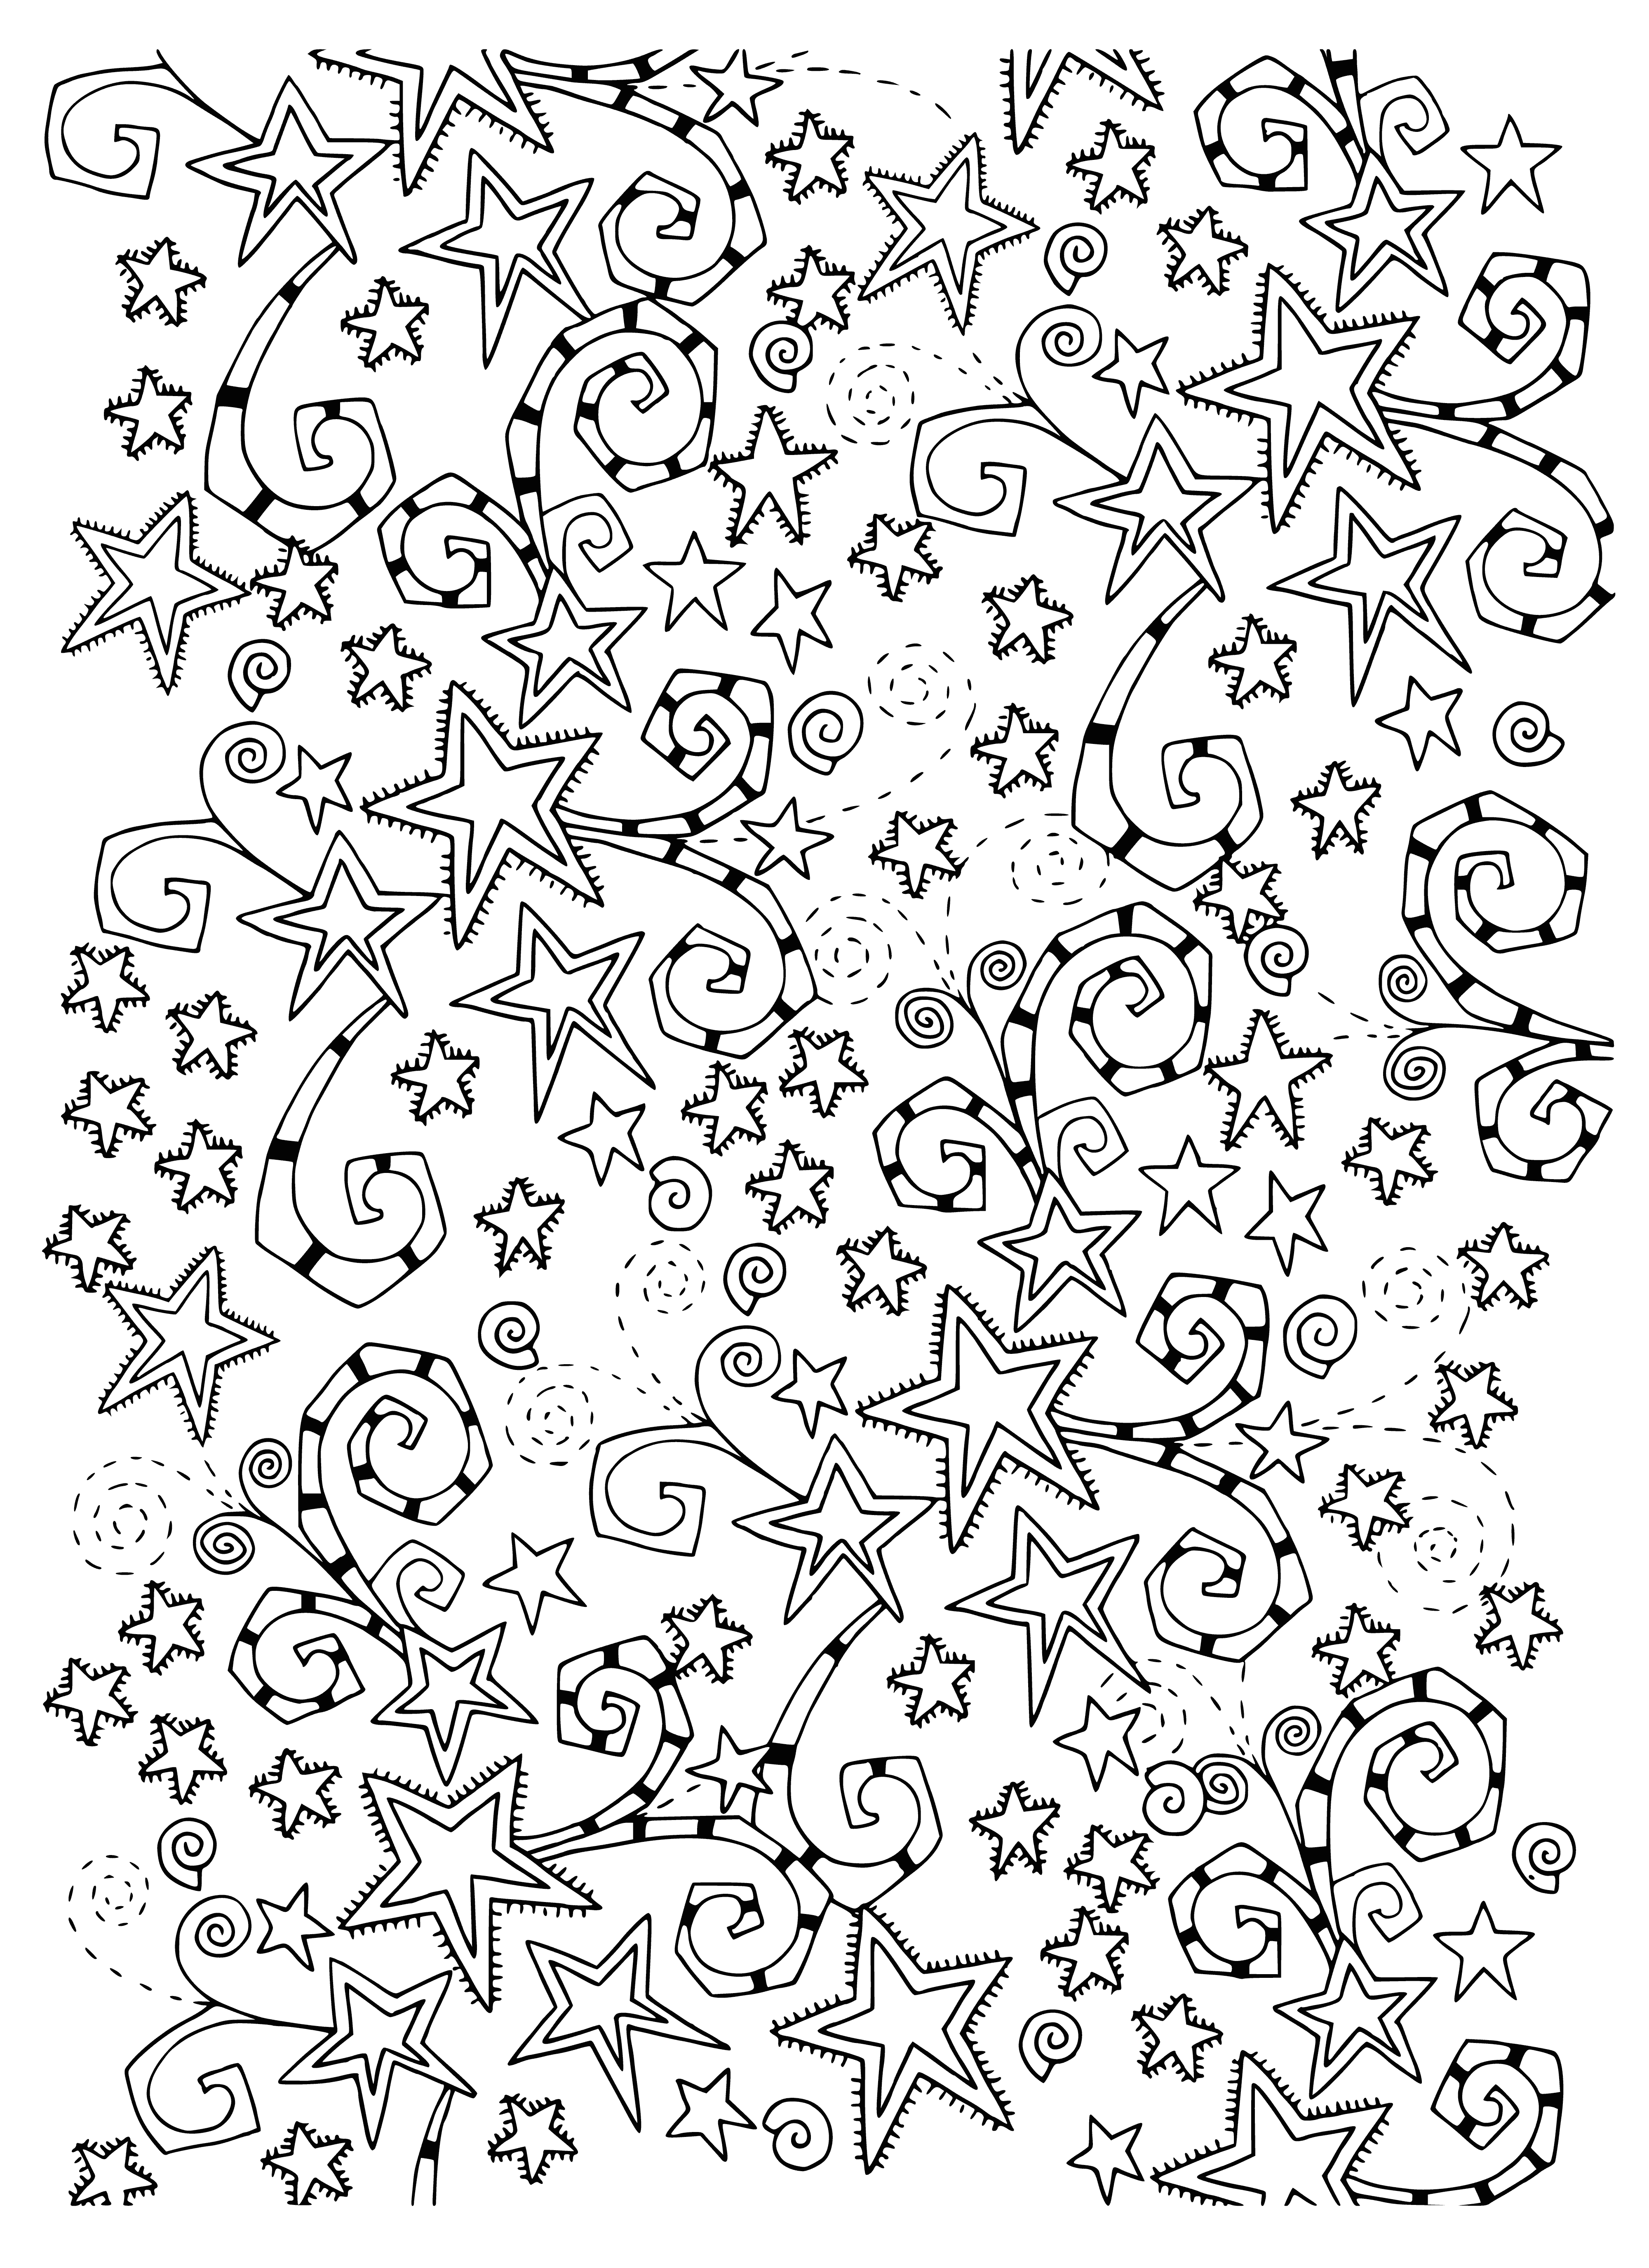 Stars coloring page